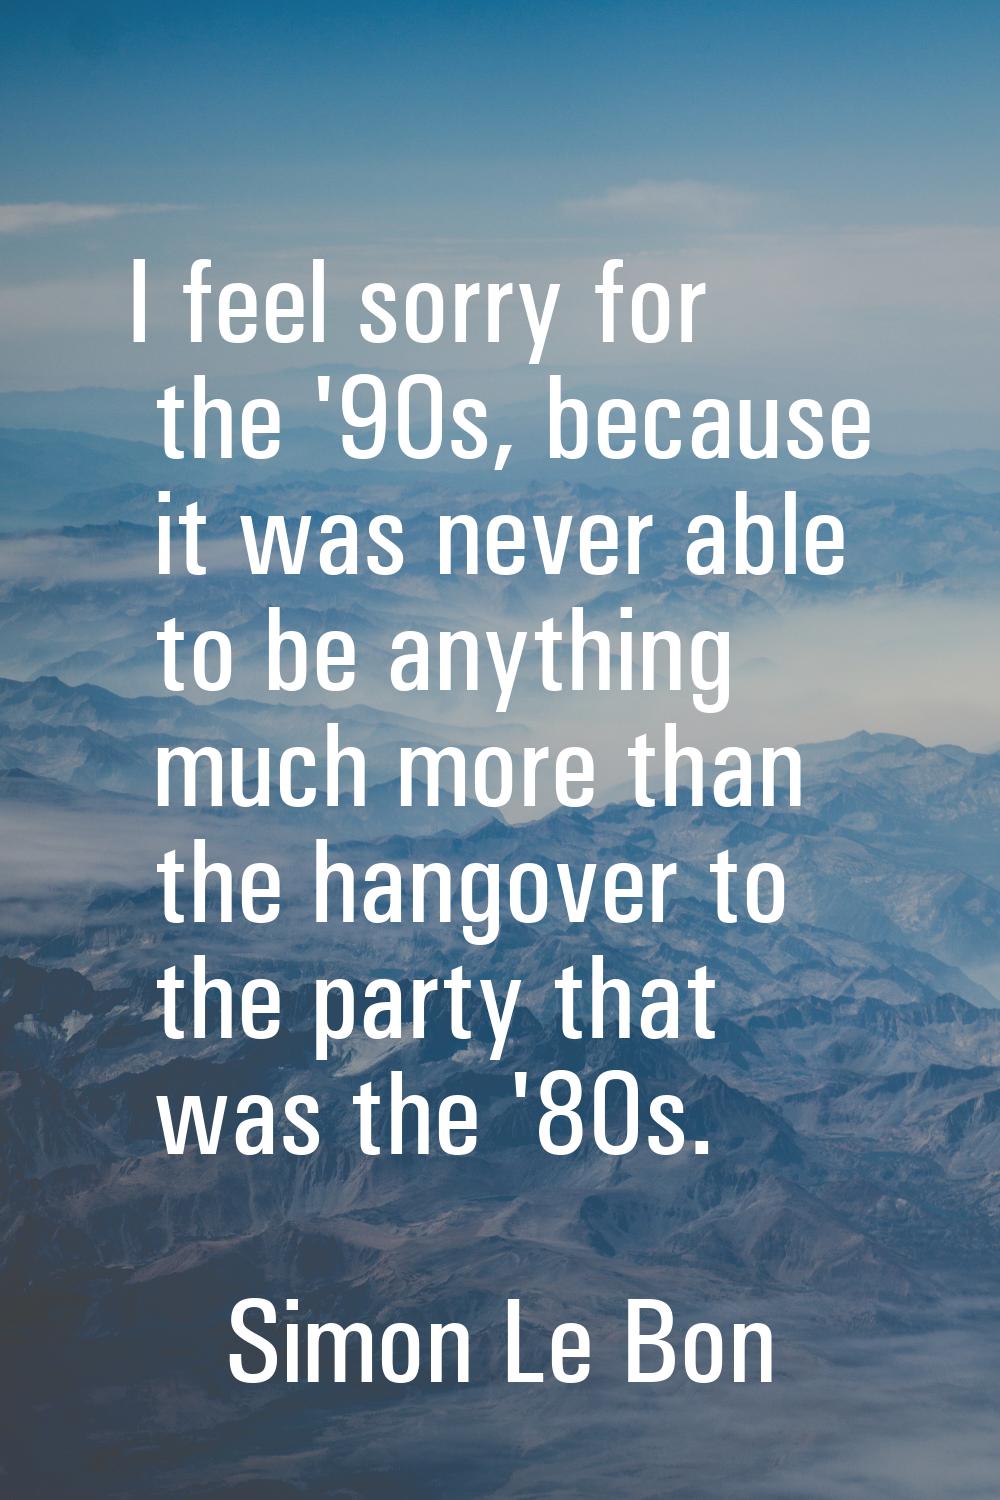 I feel sorry for the '90s, because it was never able to be anything much more than the hangover to 